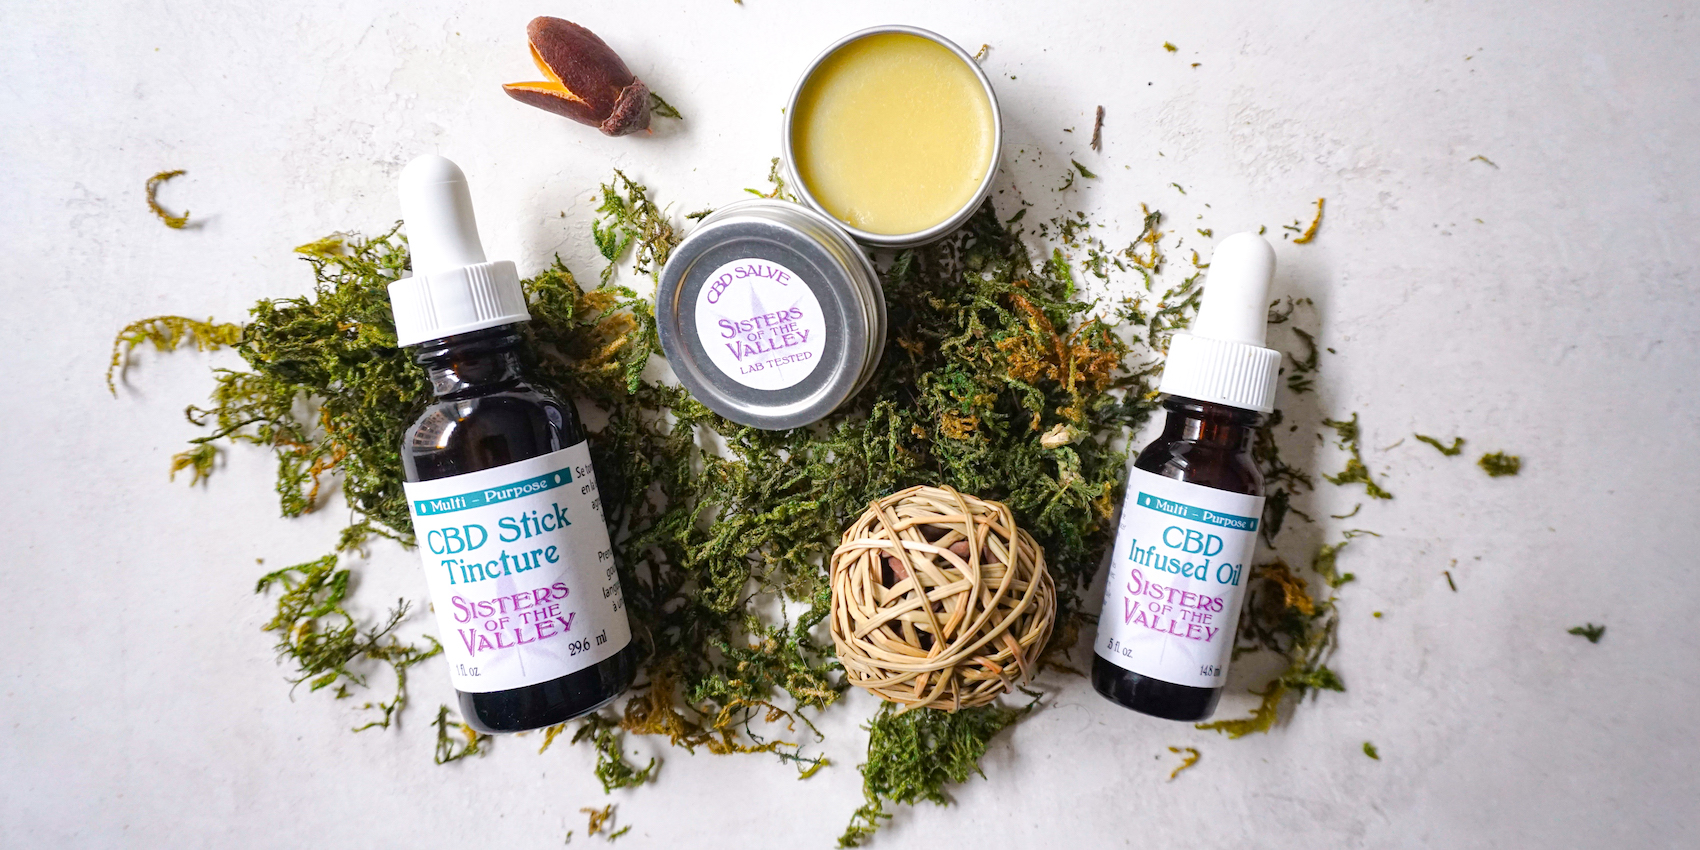 Sisters of the Valley CBD oil and topicals